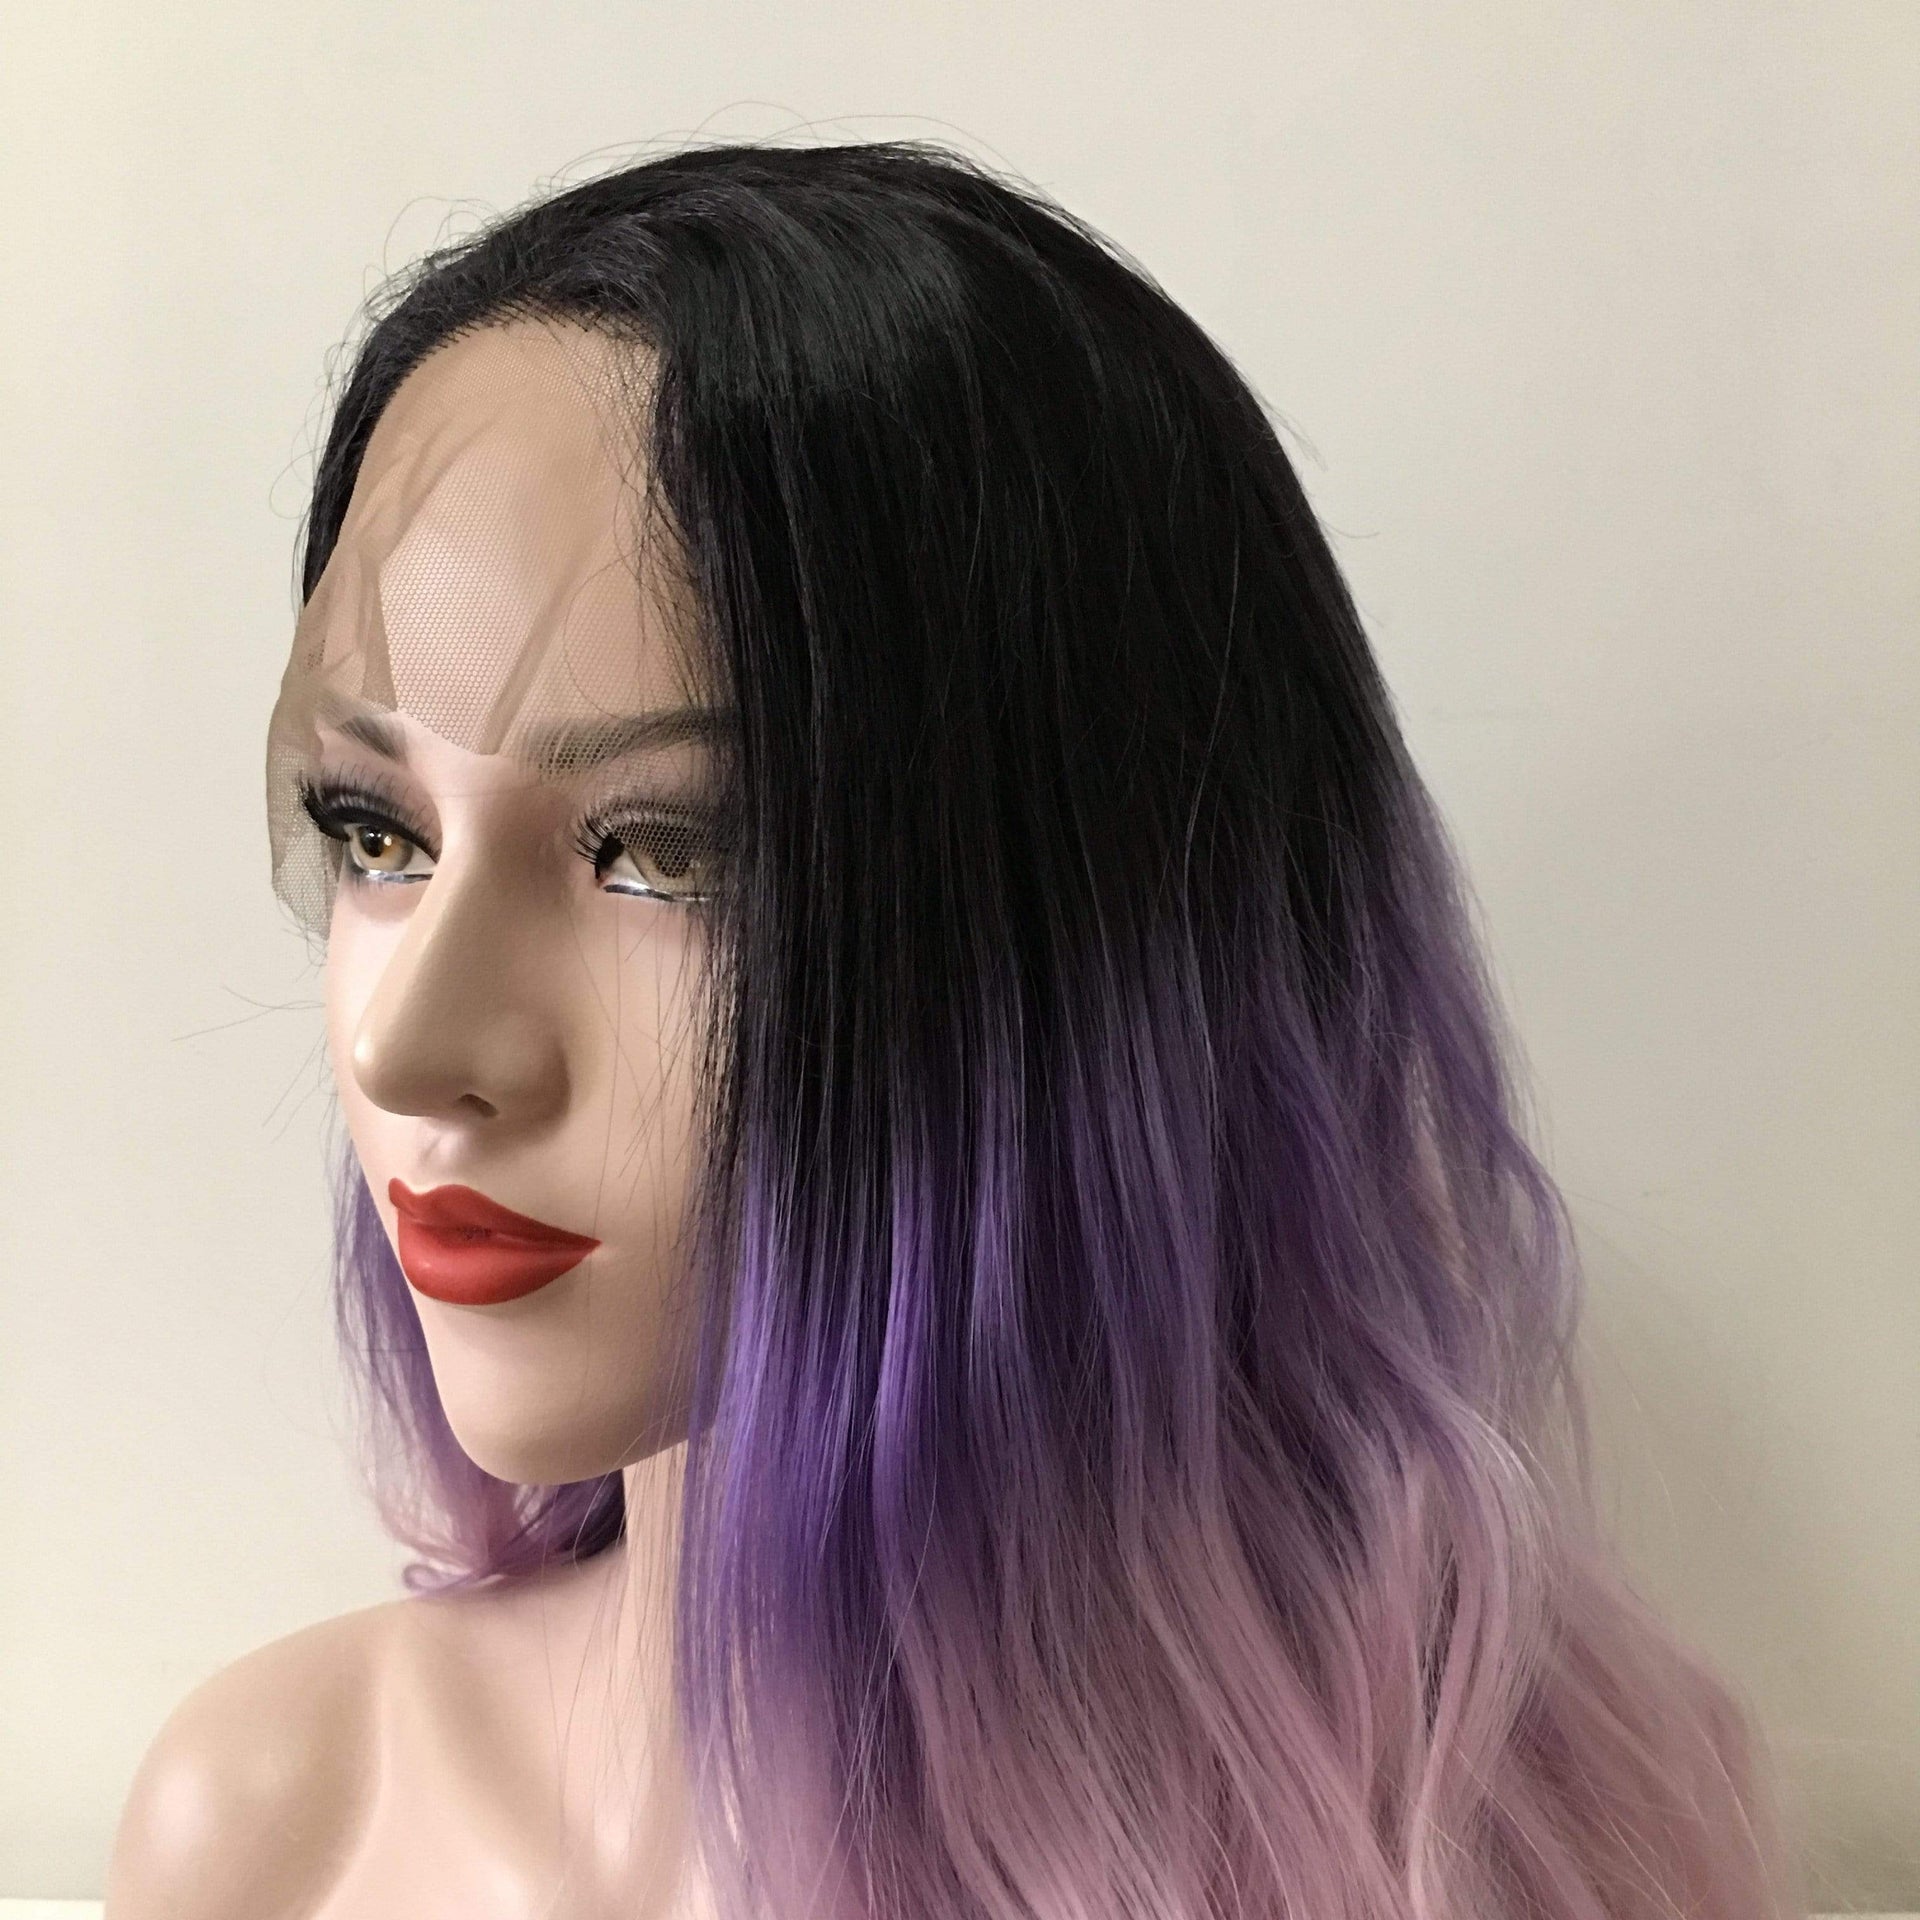 nevermindyrhead Women Pink Purple Ombre Dark Root Lace Front Long Curly Middle Part Wig